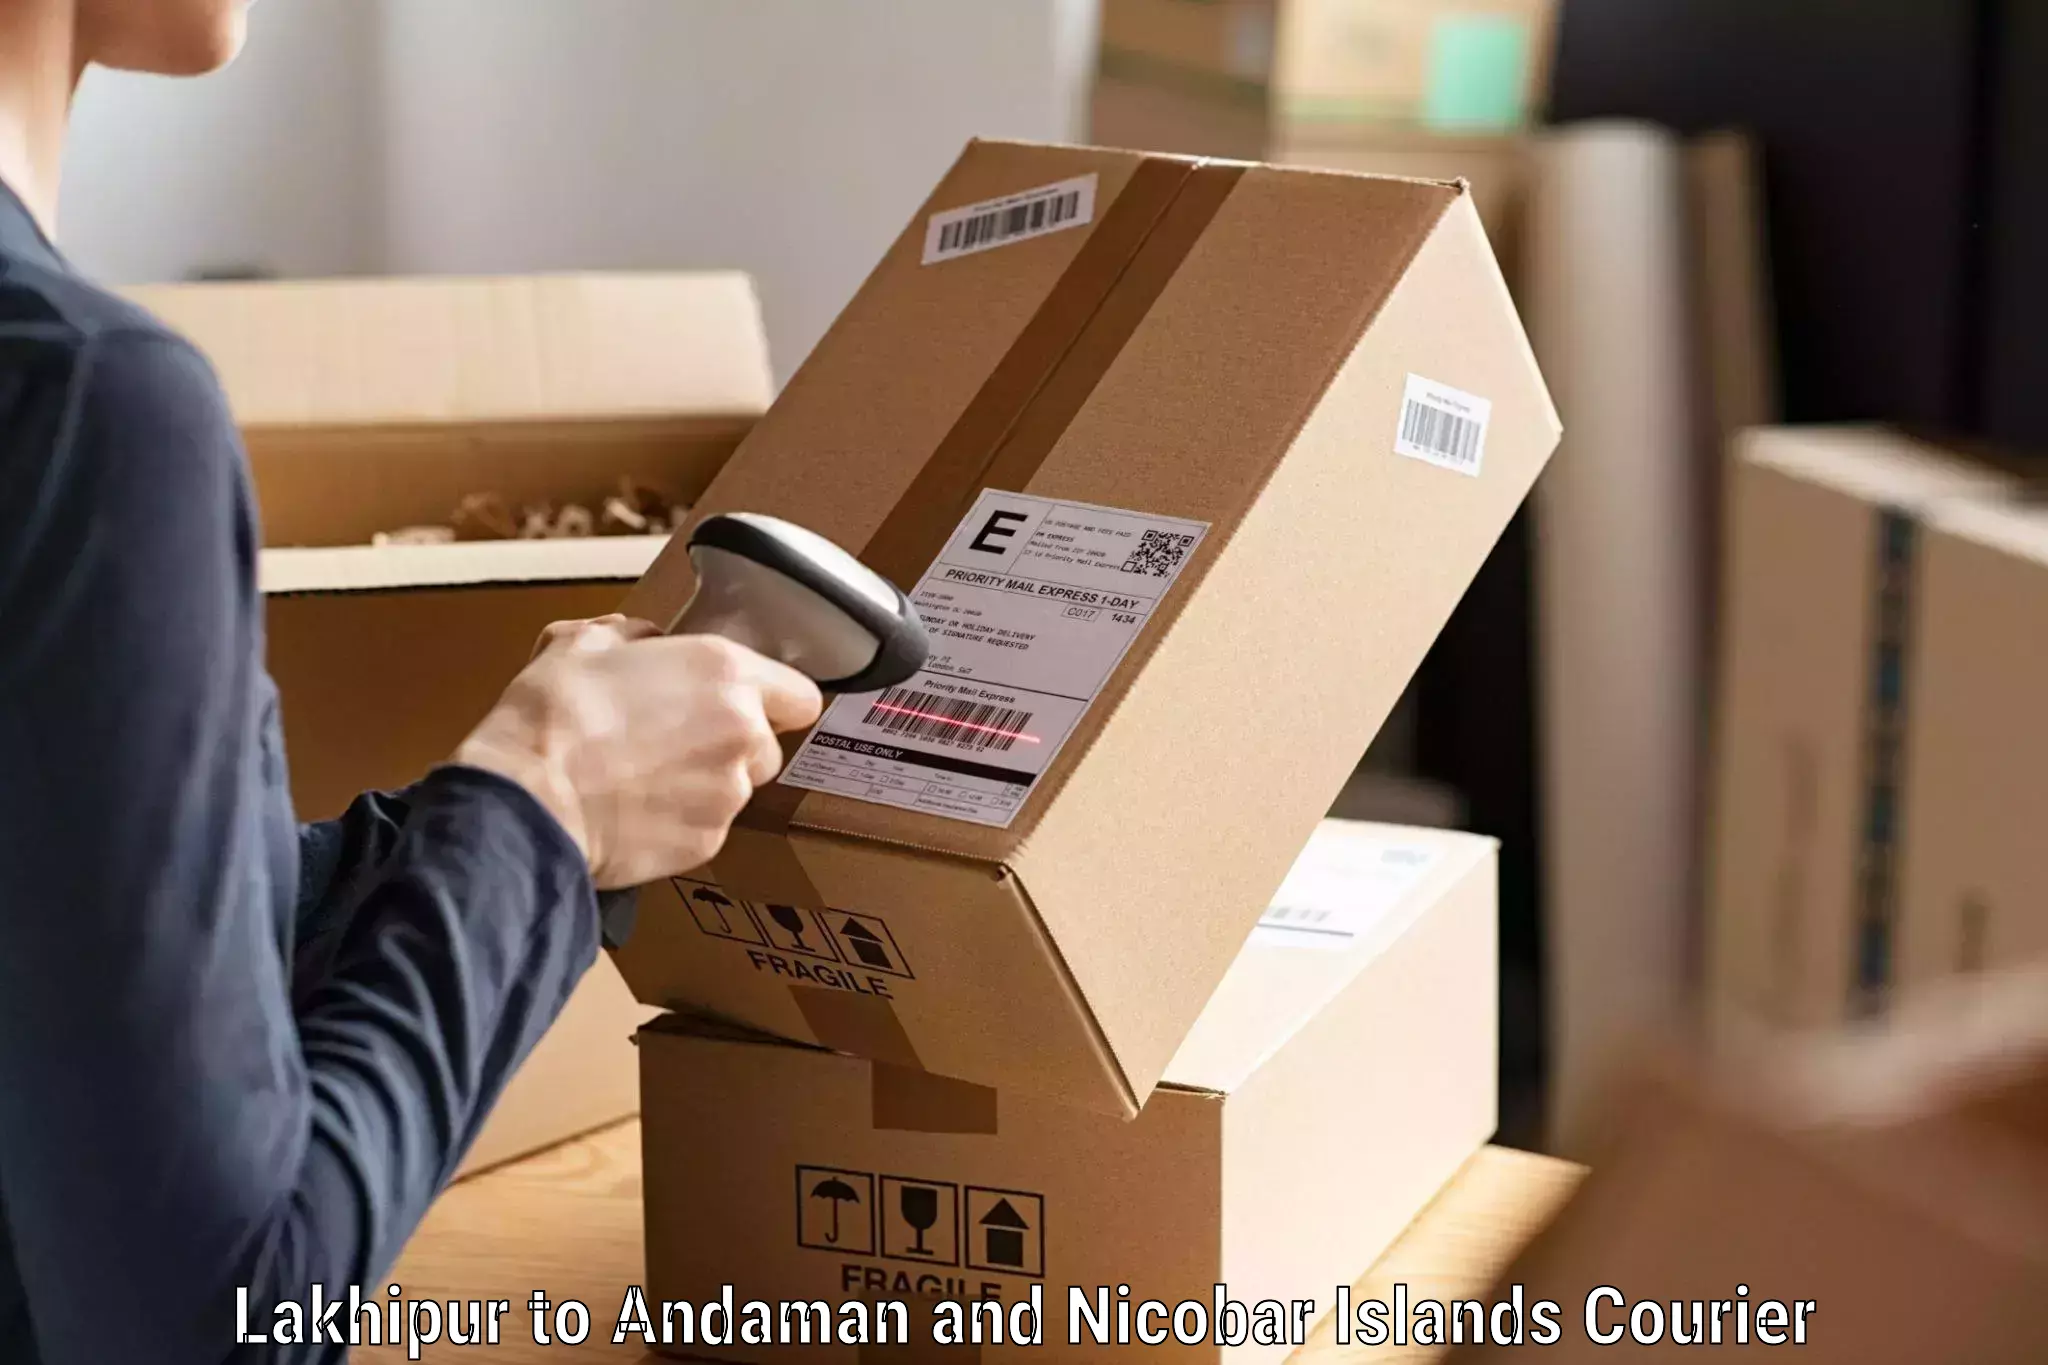 Affordable parcel service in Lakhipur to Andaman and Nicobar Islands